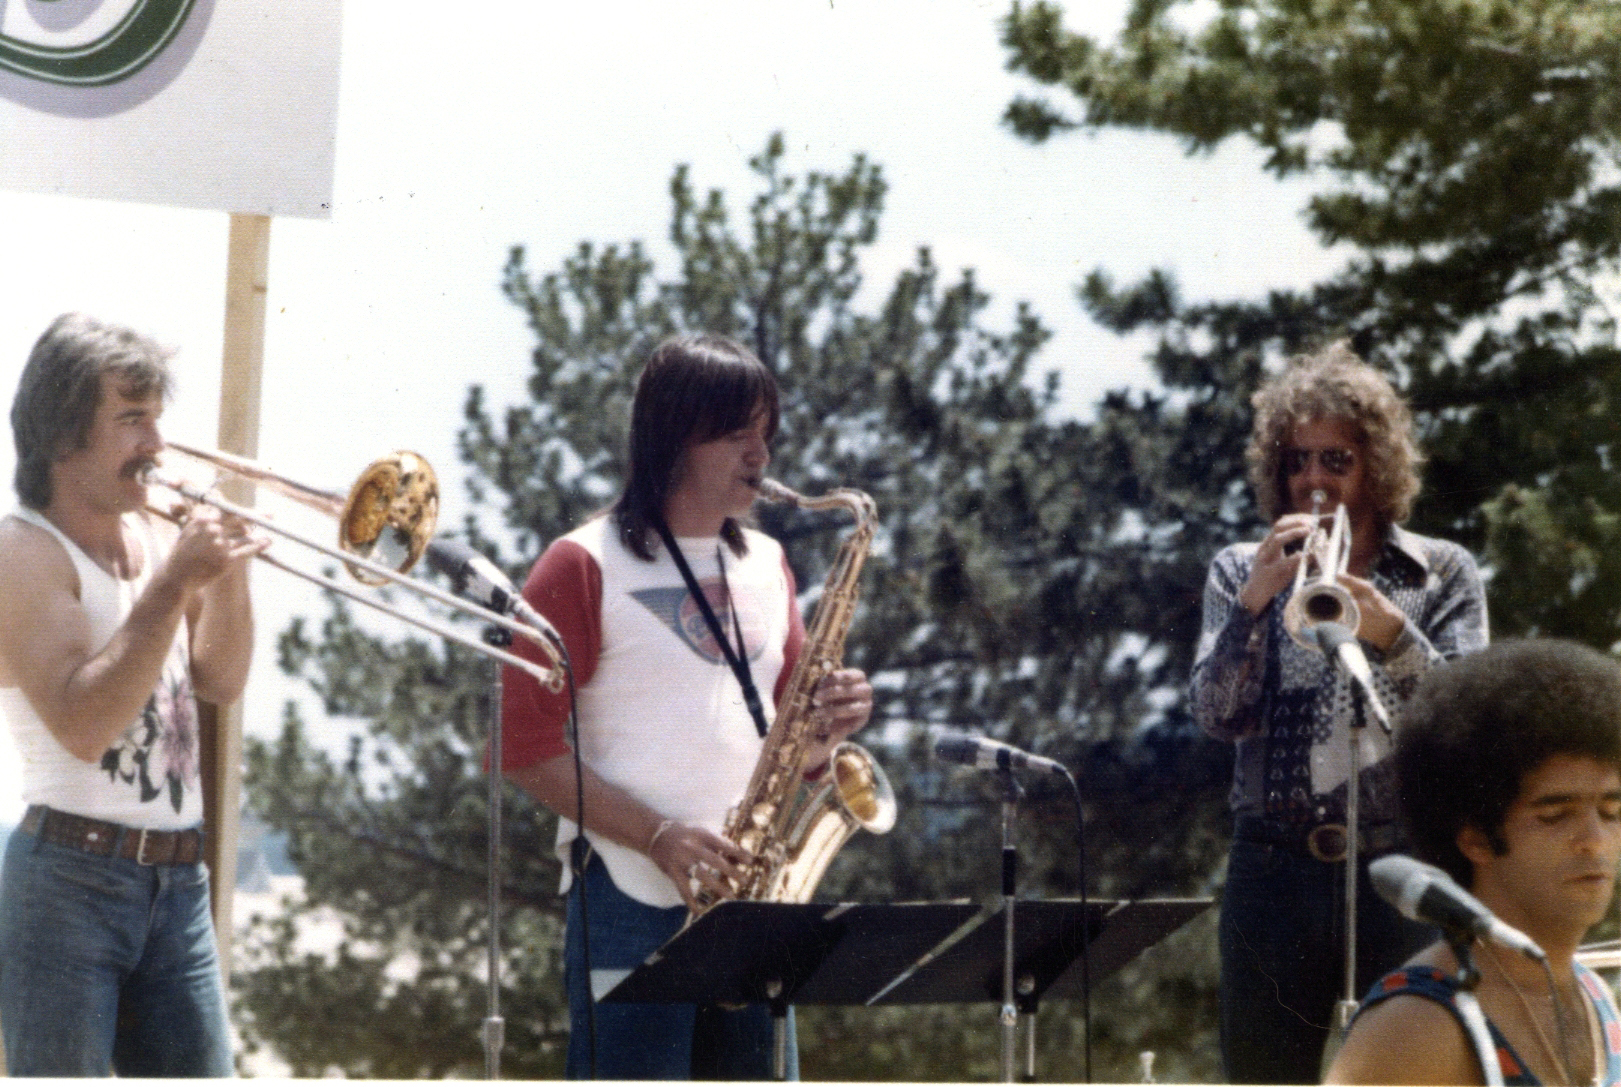 The band Chicago performed at Caribou Ranch.